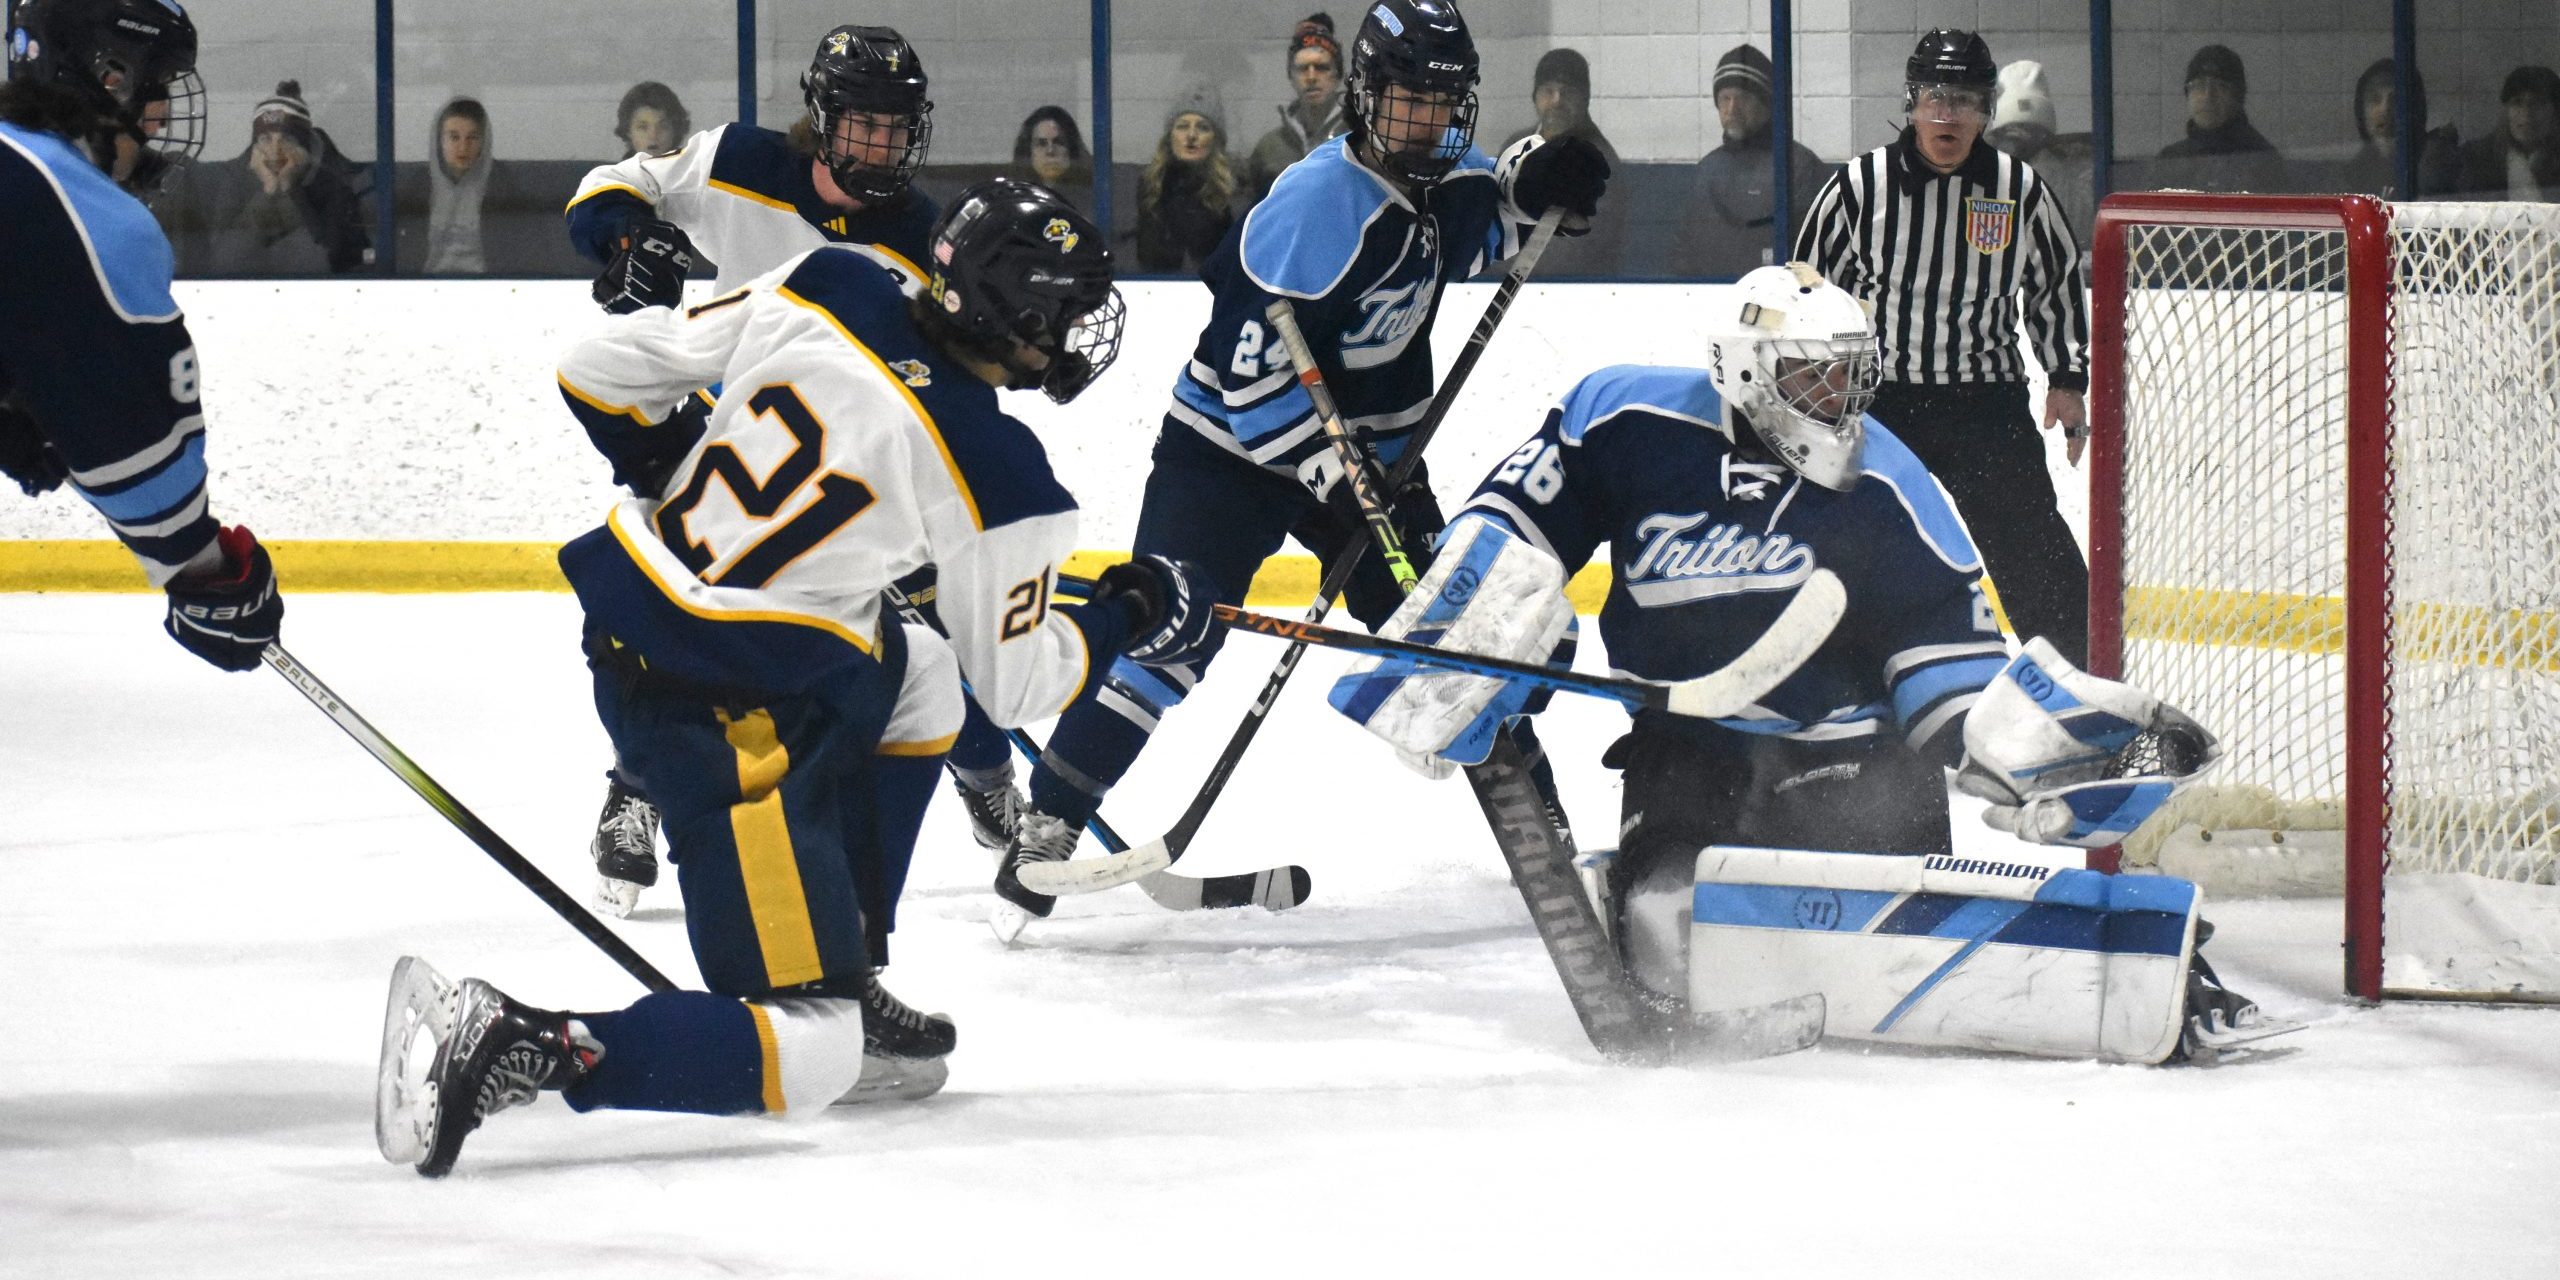 Explosive third period lifts Lynnfield past Triton - Itemlive